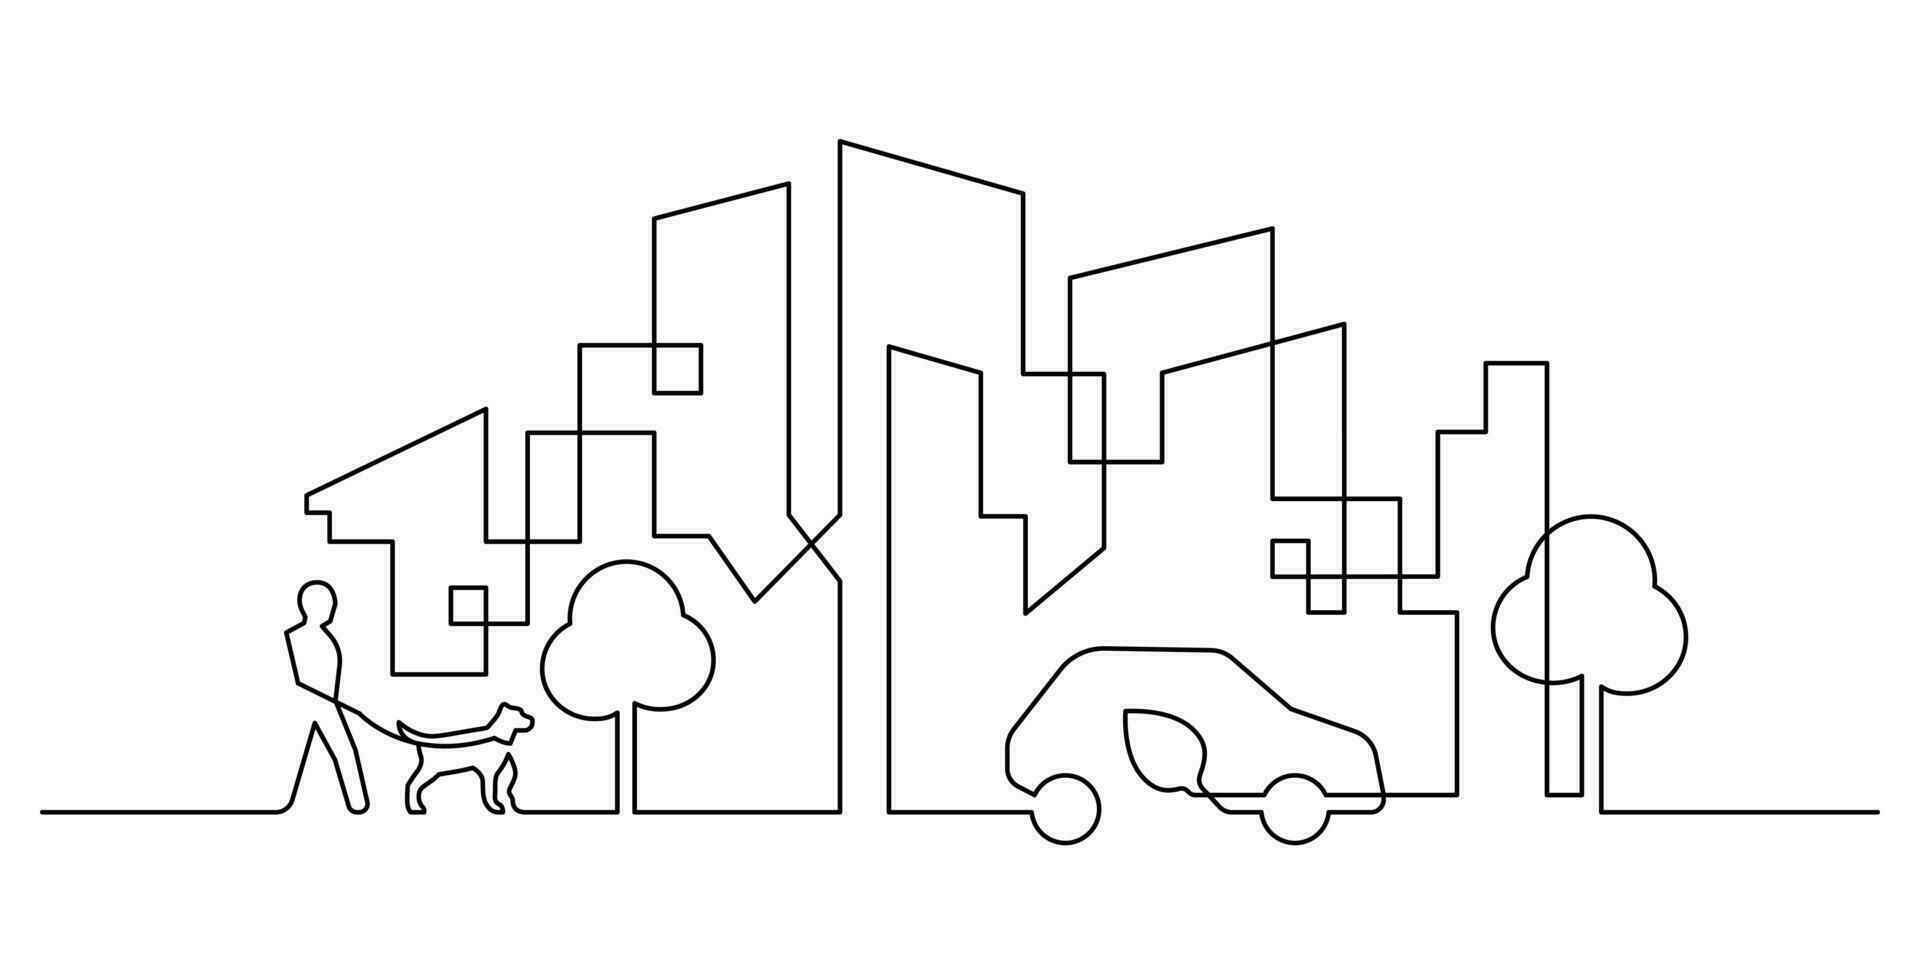 cityscape ecology lifestyle scene in continuous line drawing vector